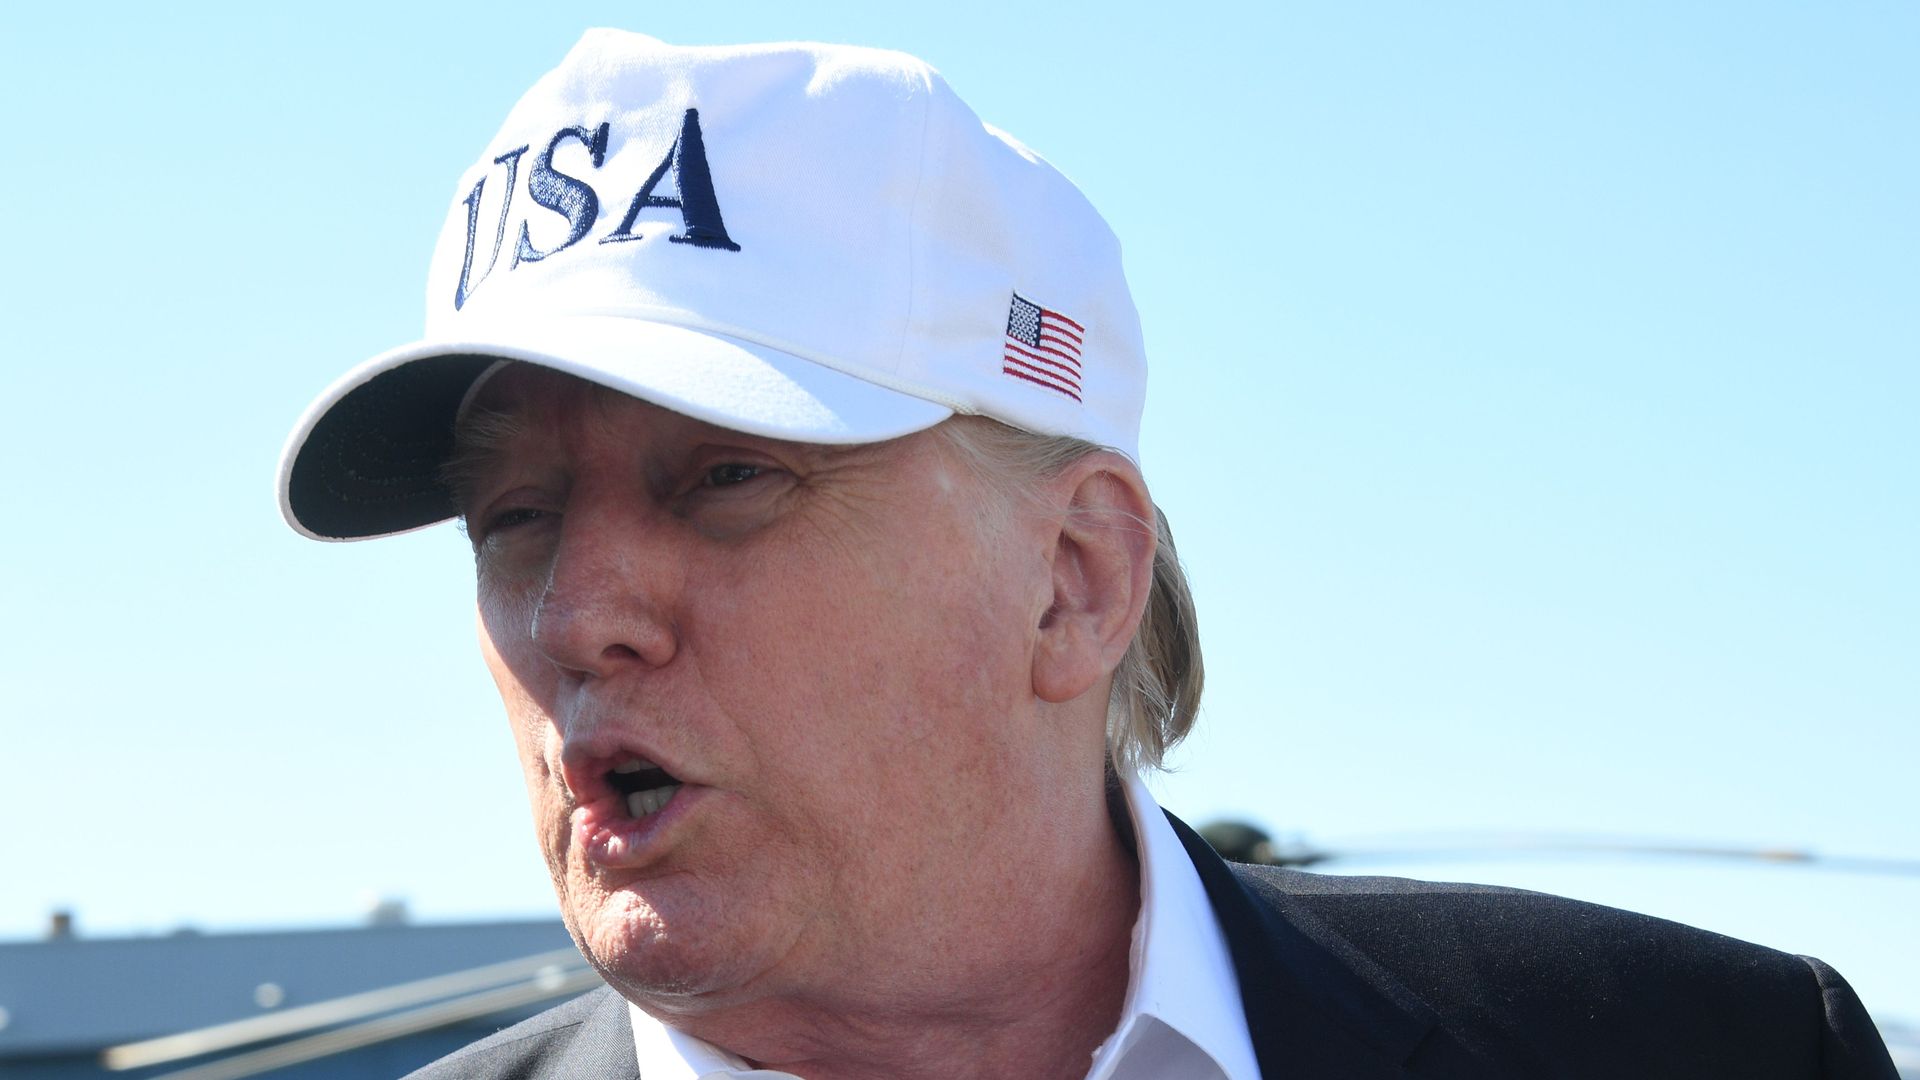 Donald Trump speaks with mouth open before a blue sky wearing a white USA hat.